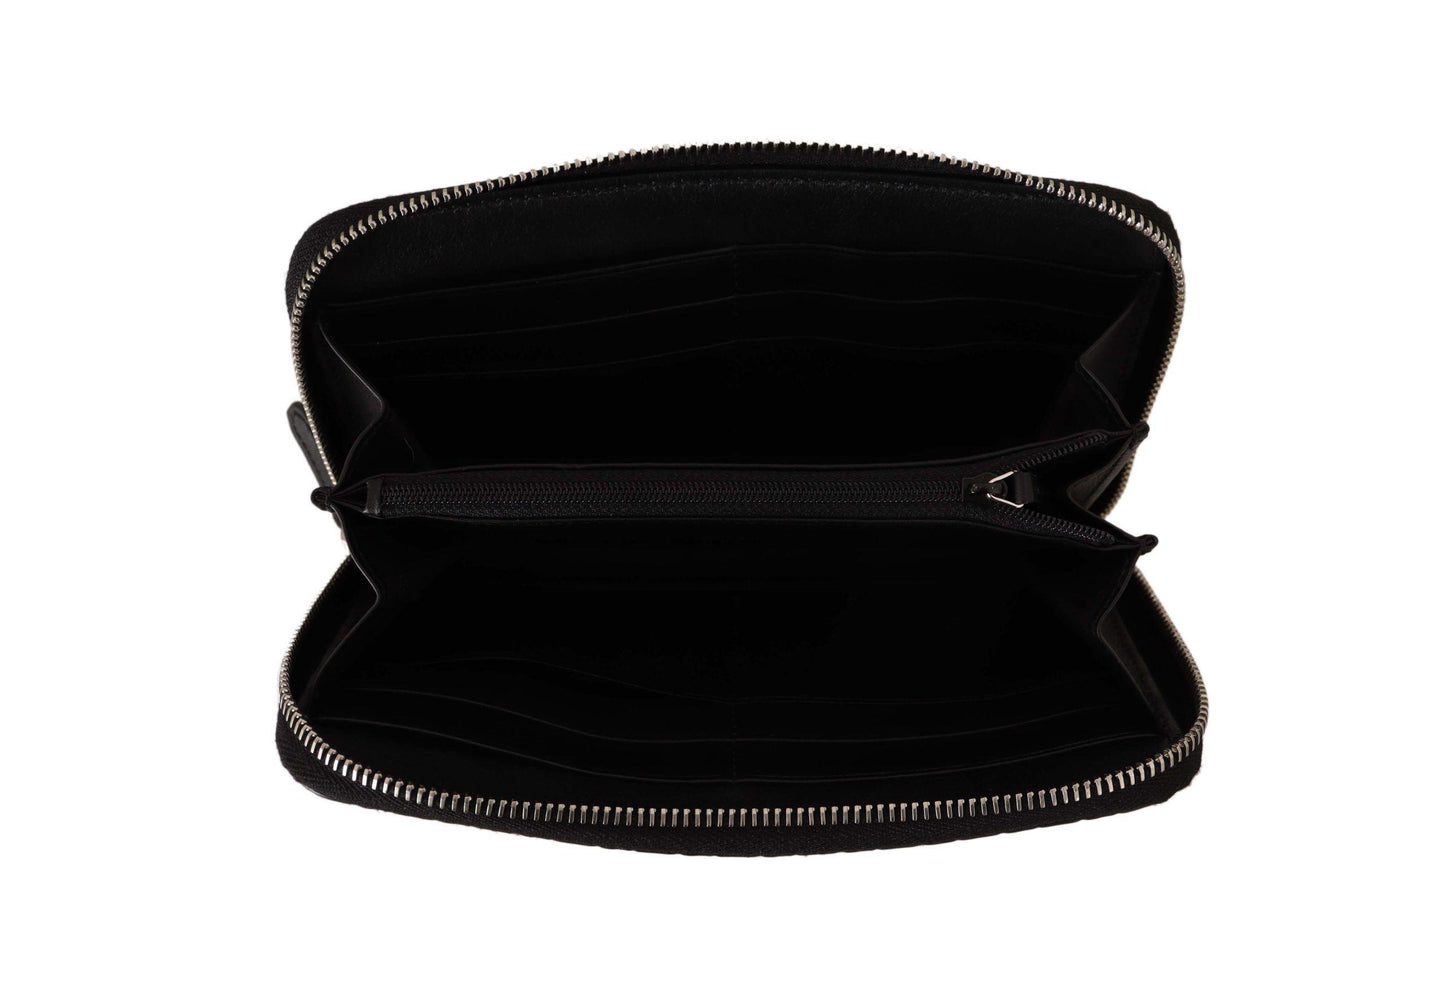 Gucci Black Wallet Microguccissima Leather Zipper wallet - Designed by Gucci Available to Buy at a Discounted Price on Moon Behind The Hill Online Designer Discount Store